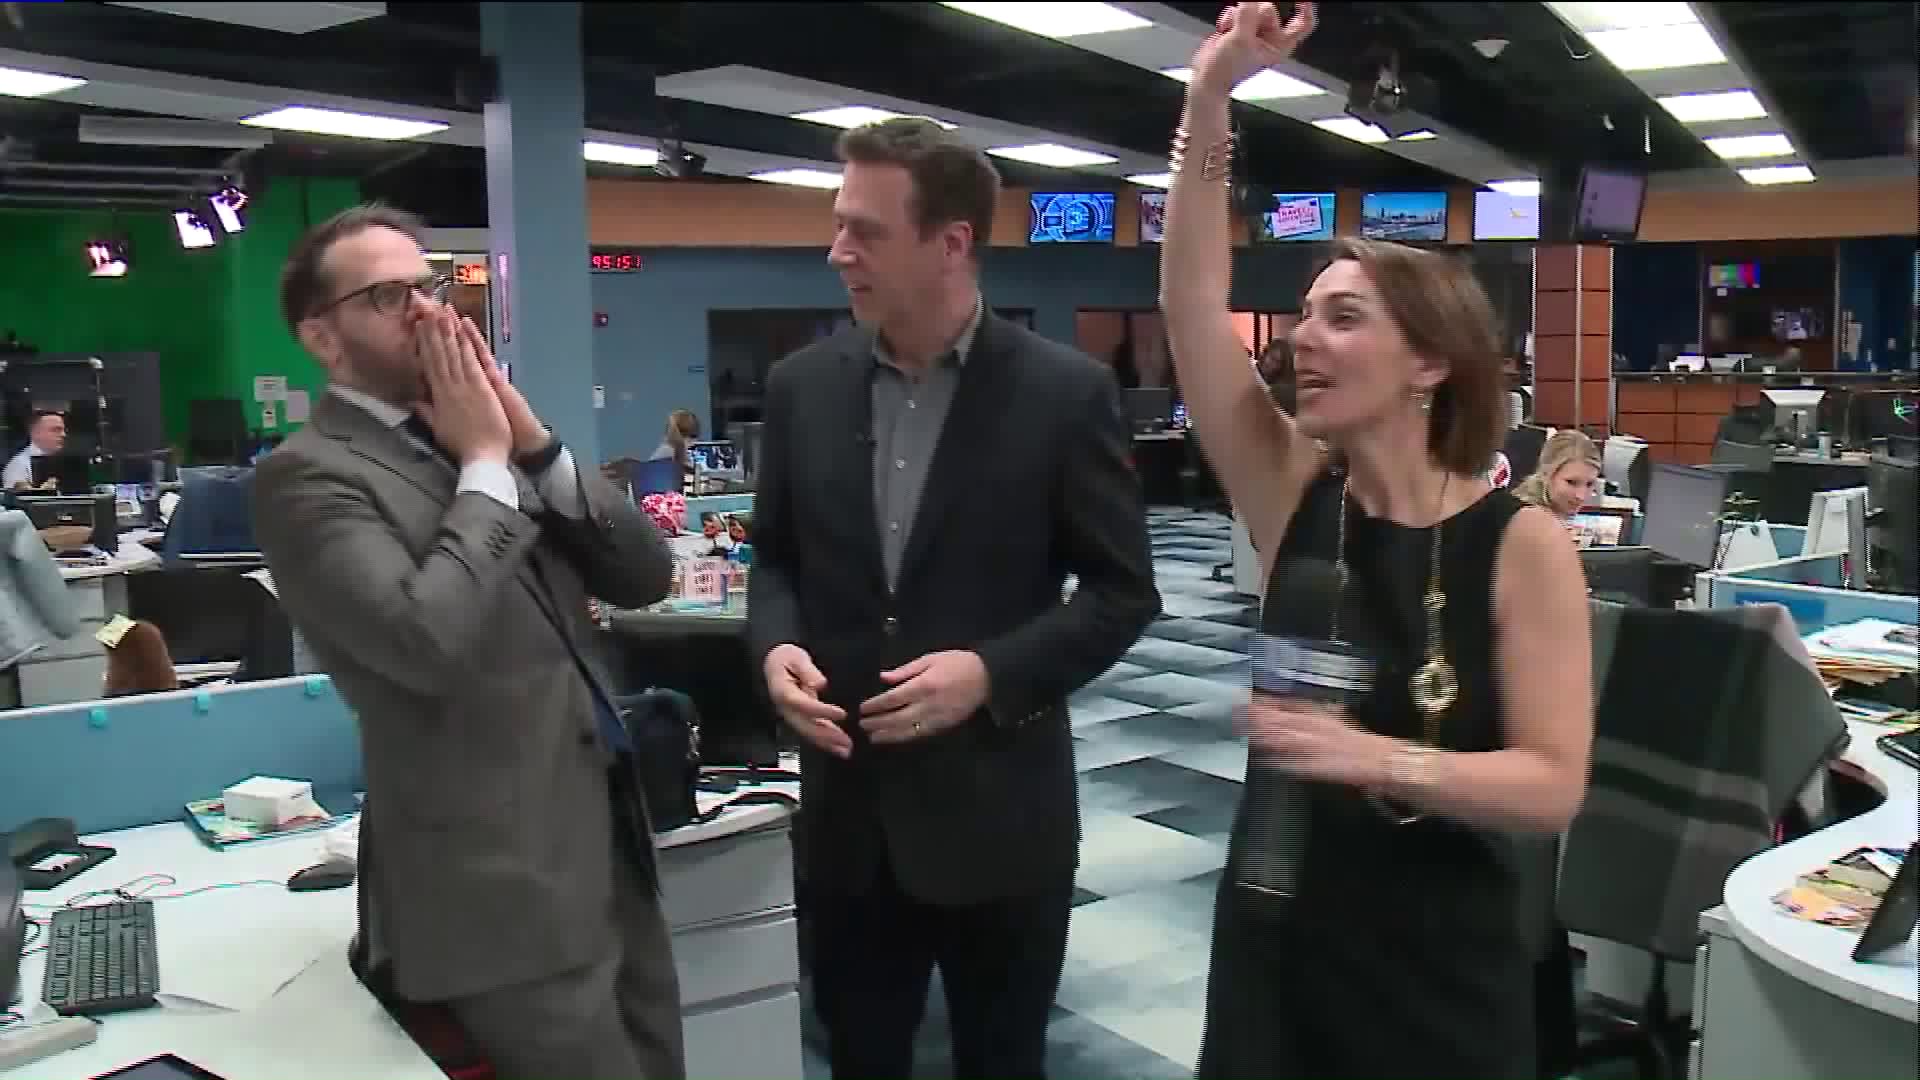 Around Town visits the WGN Newsroom with Mentalist Mark Toland